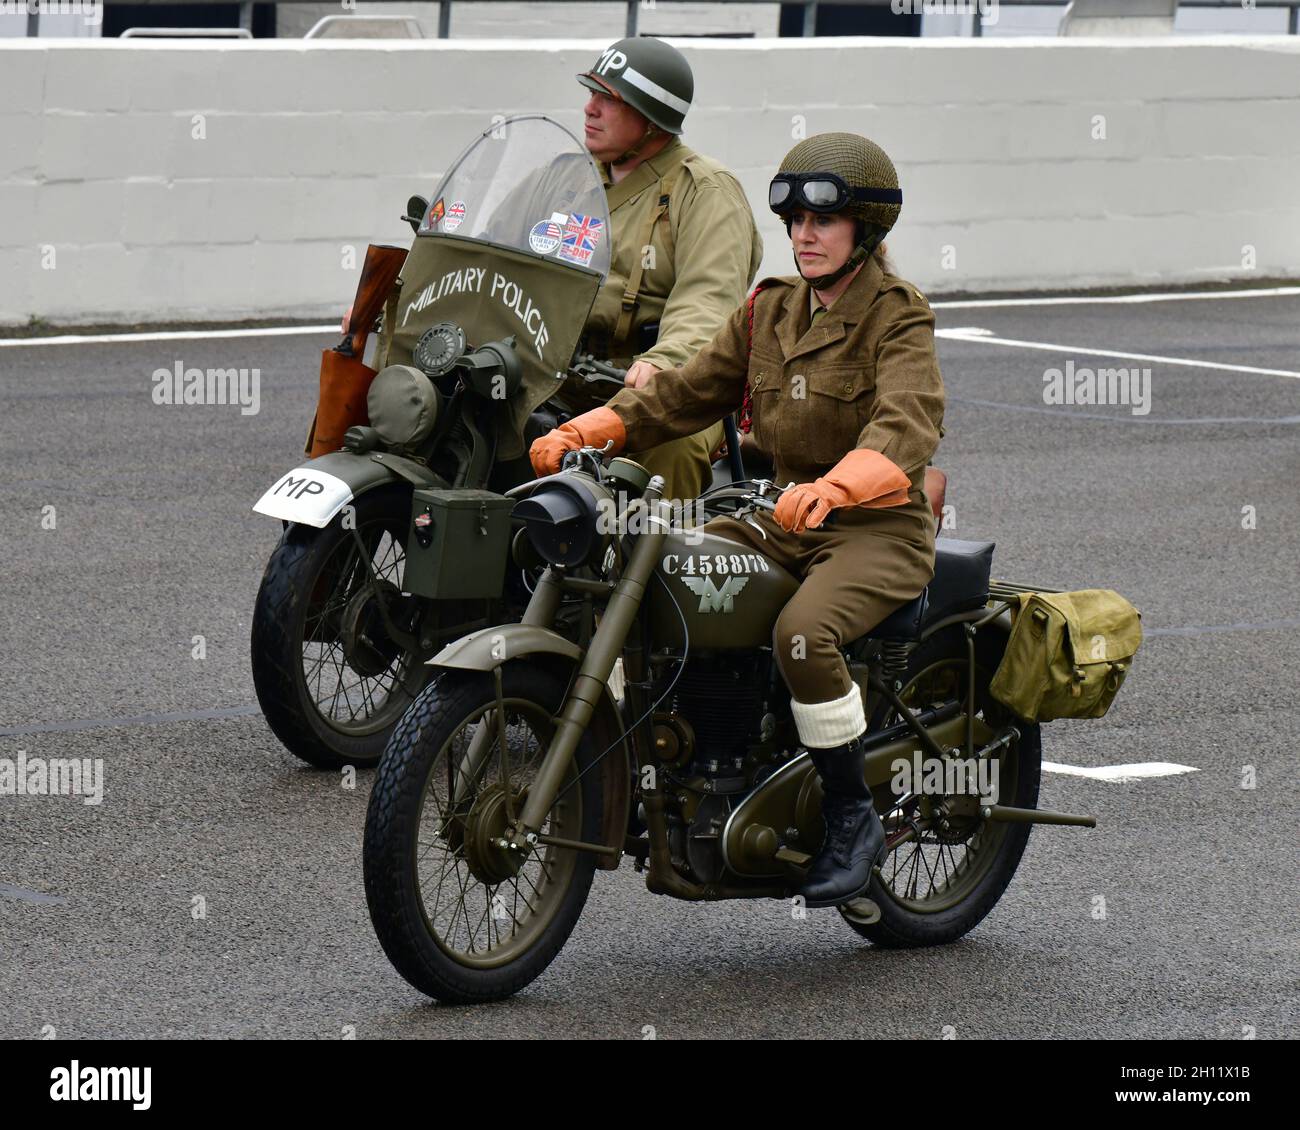 Harley Davidson WLA, Mattchless, Victory Parade, Goodwood Revival 2021, Goodwood,Chichester, West Sussex, Angleterre, septembre 2021. Banque D'Images